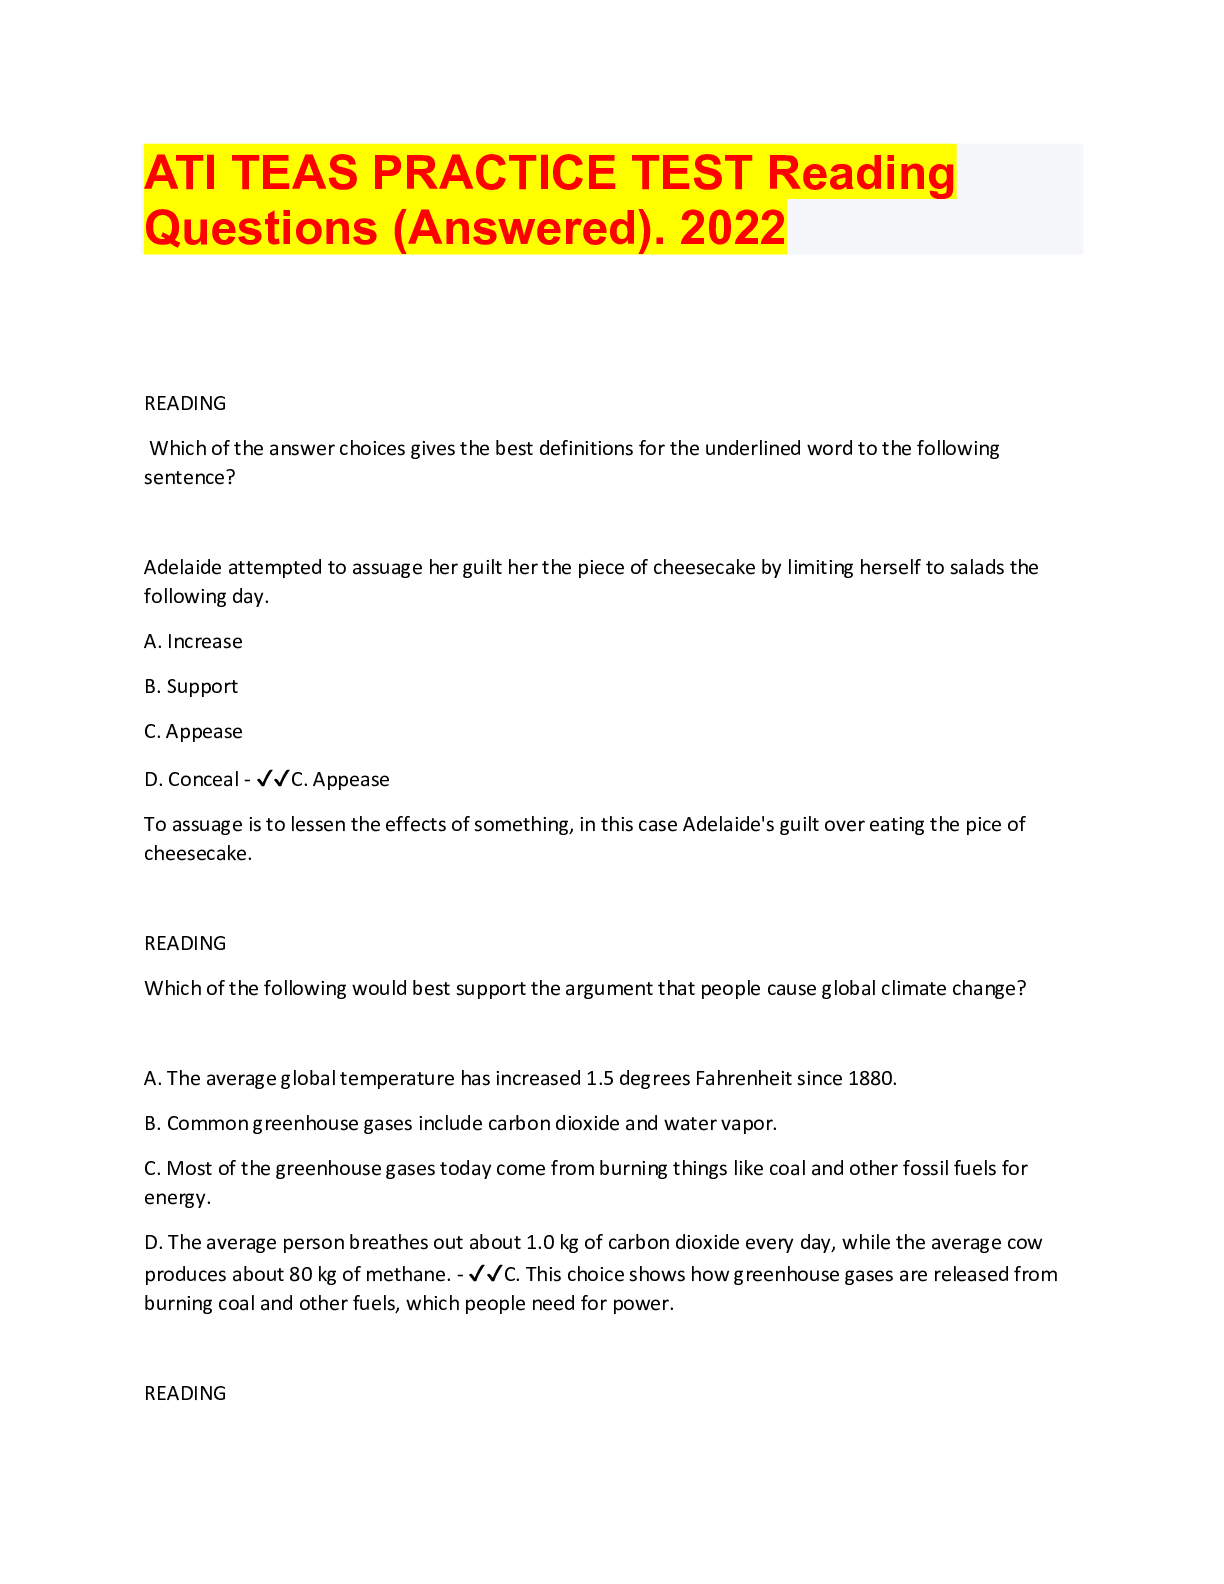 ATI TEAS PRACTICE TEST Reading Questions (Answered). 2022 - Browsegrades